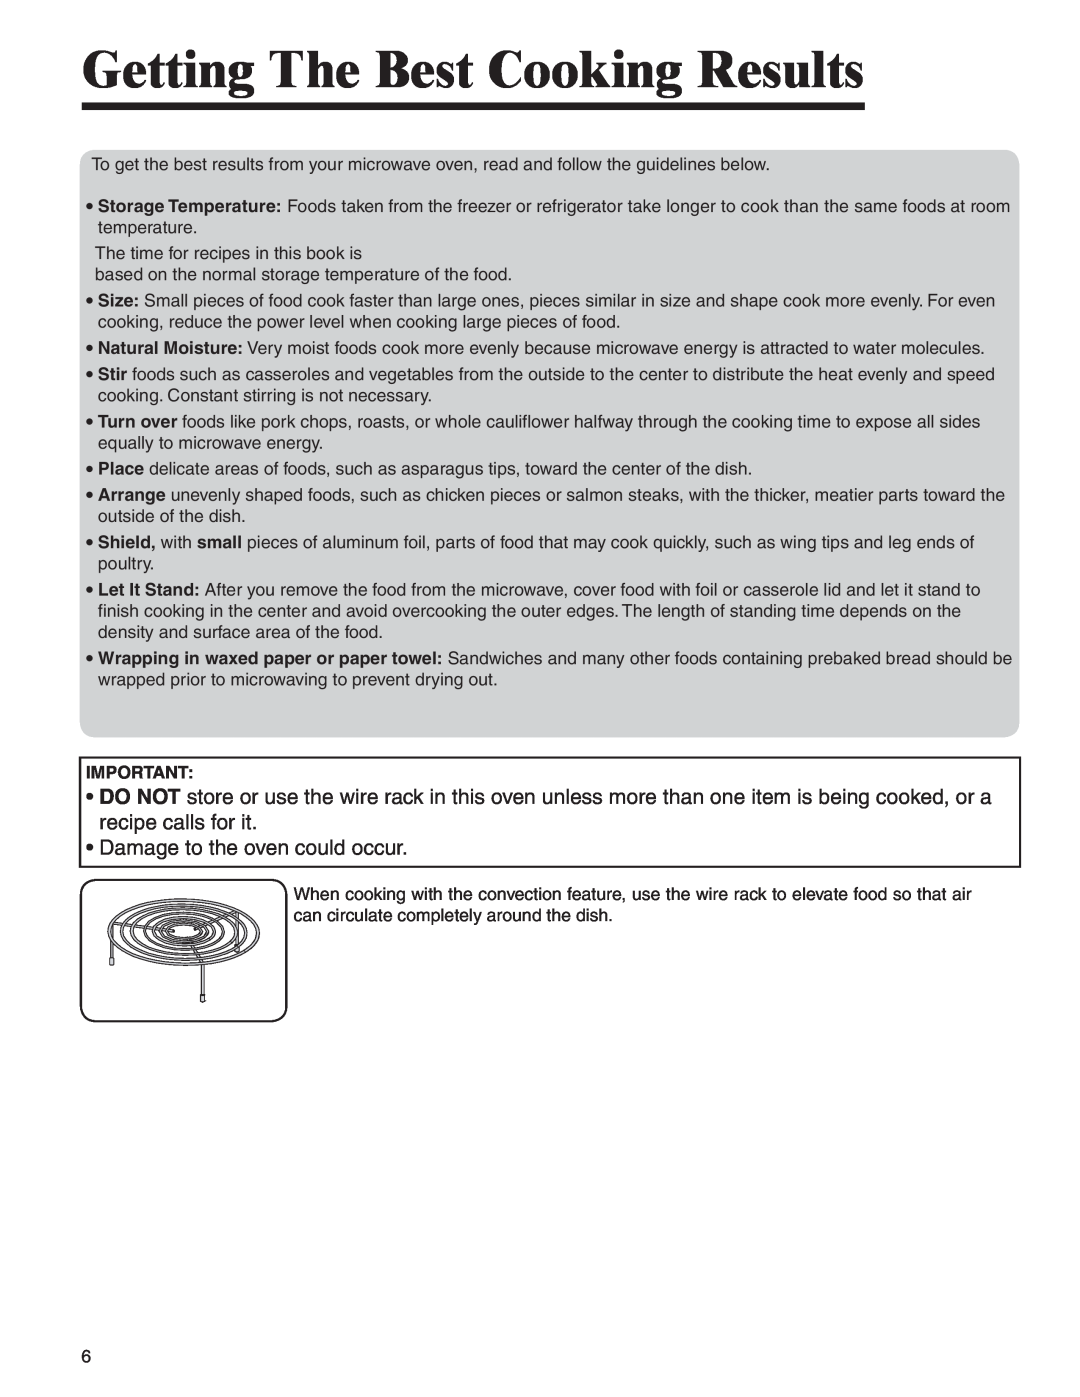 Amana AMC6158BAB, AMC6158BCB important safety instructions Getting The Best Cooking Results, •Damage to the oven could occur 